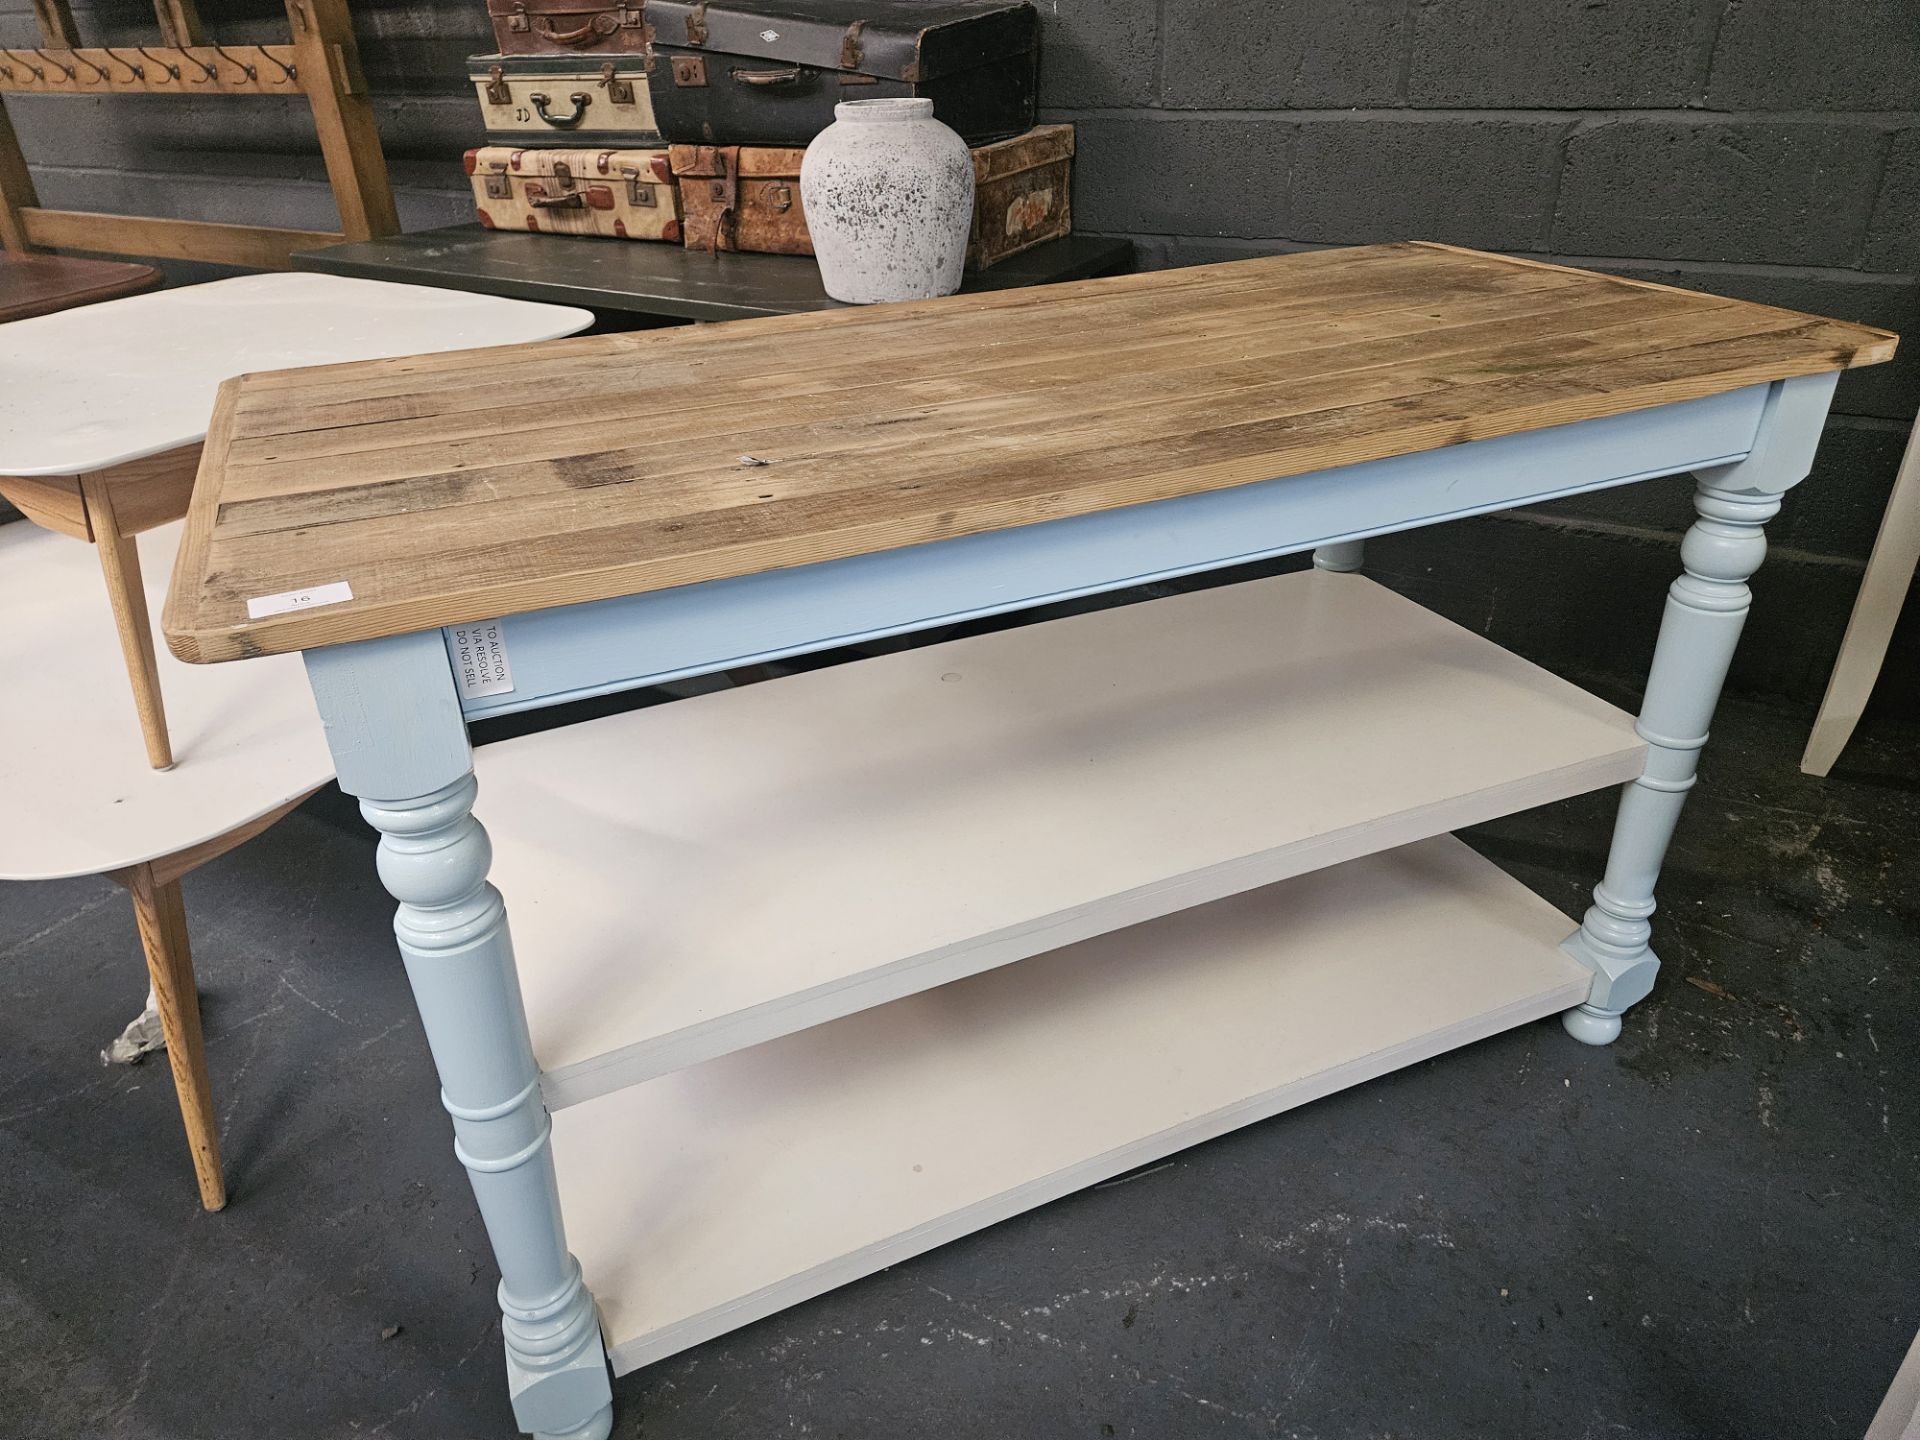 Wooden Table With Painted Legs & Under shelves - Image 3 of 3